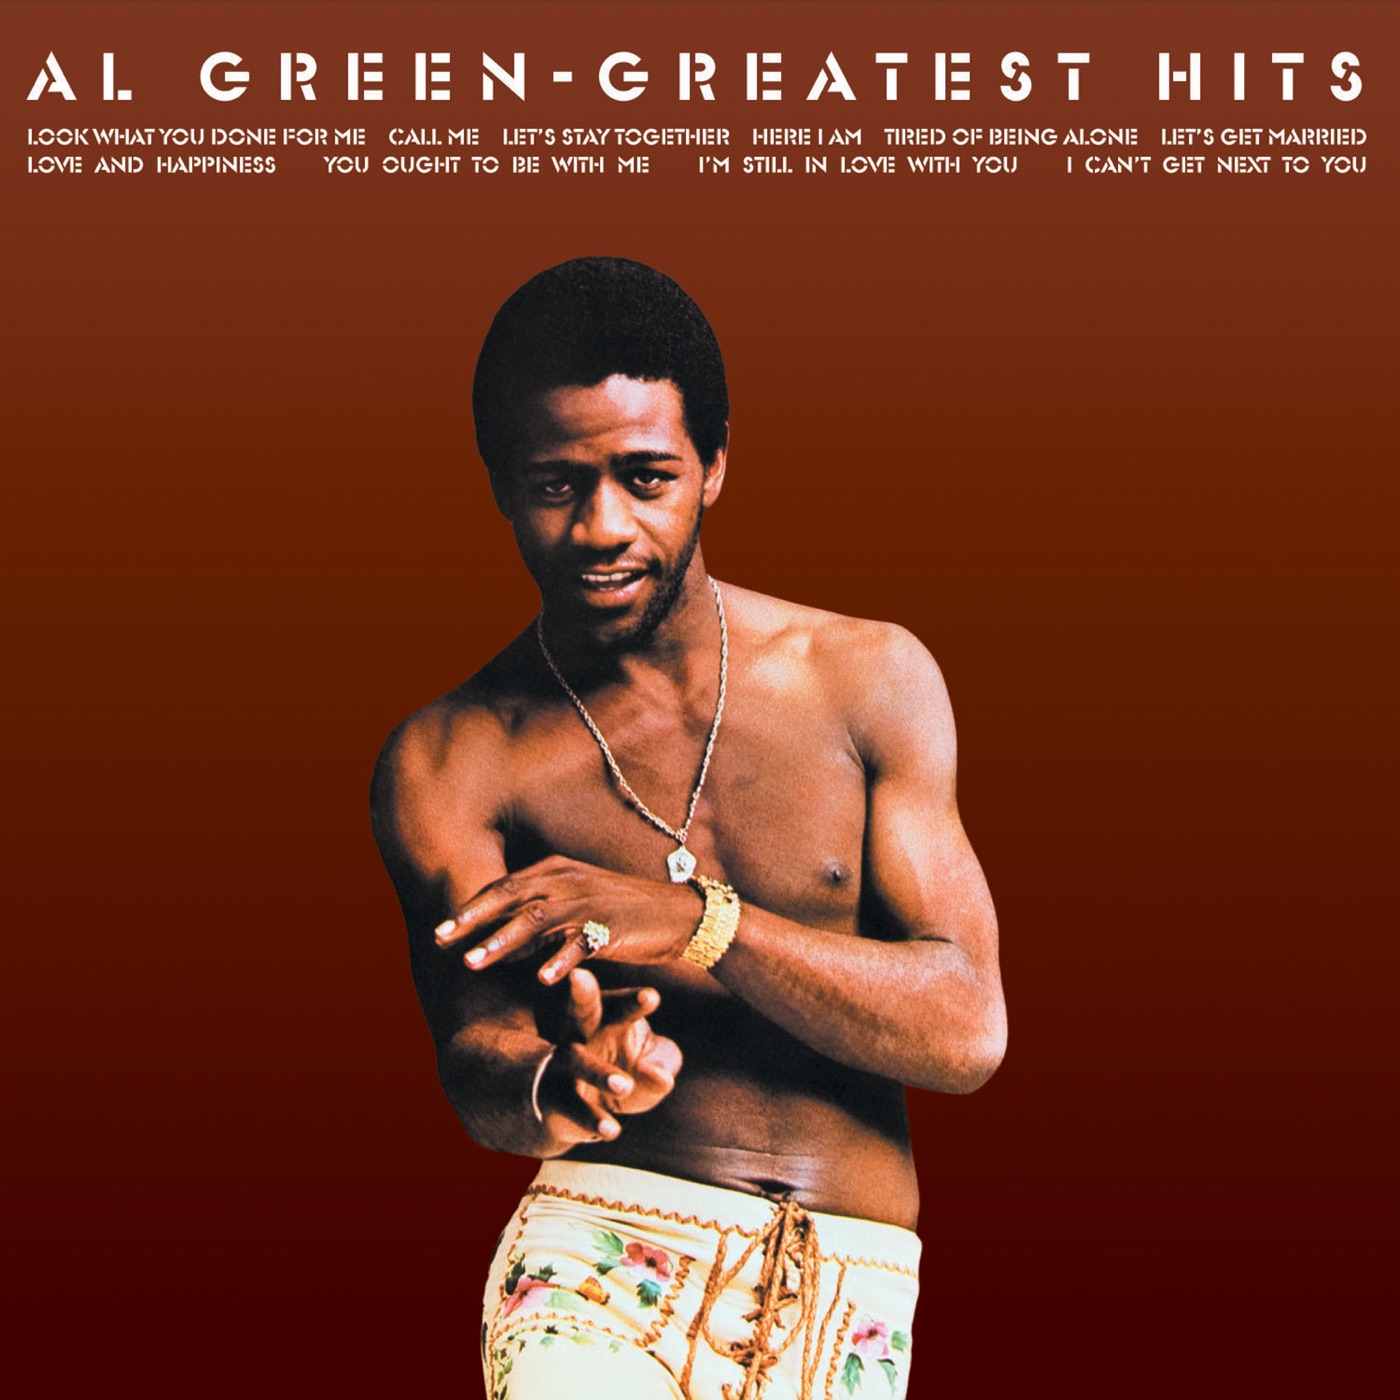 Greatest Hits by Al Green